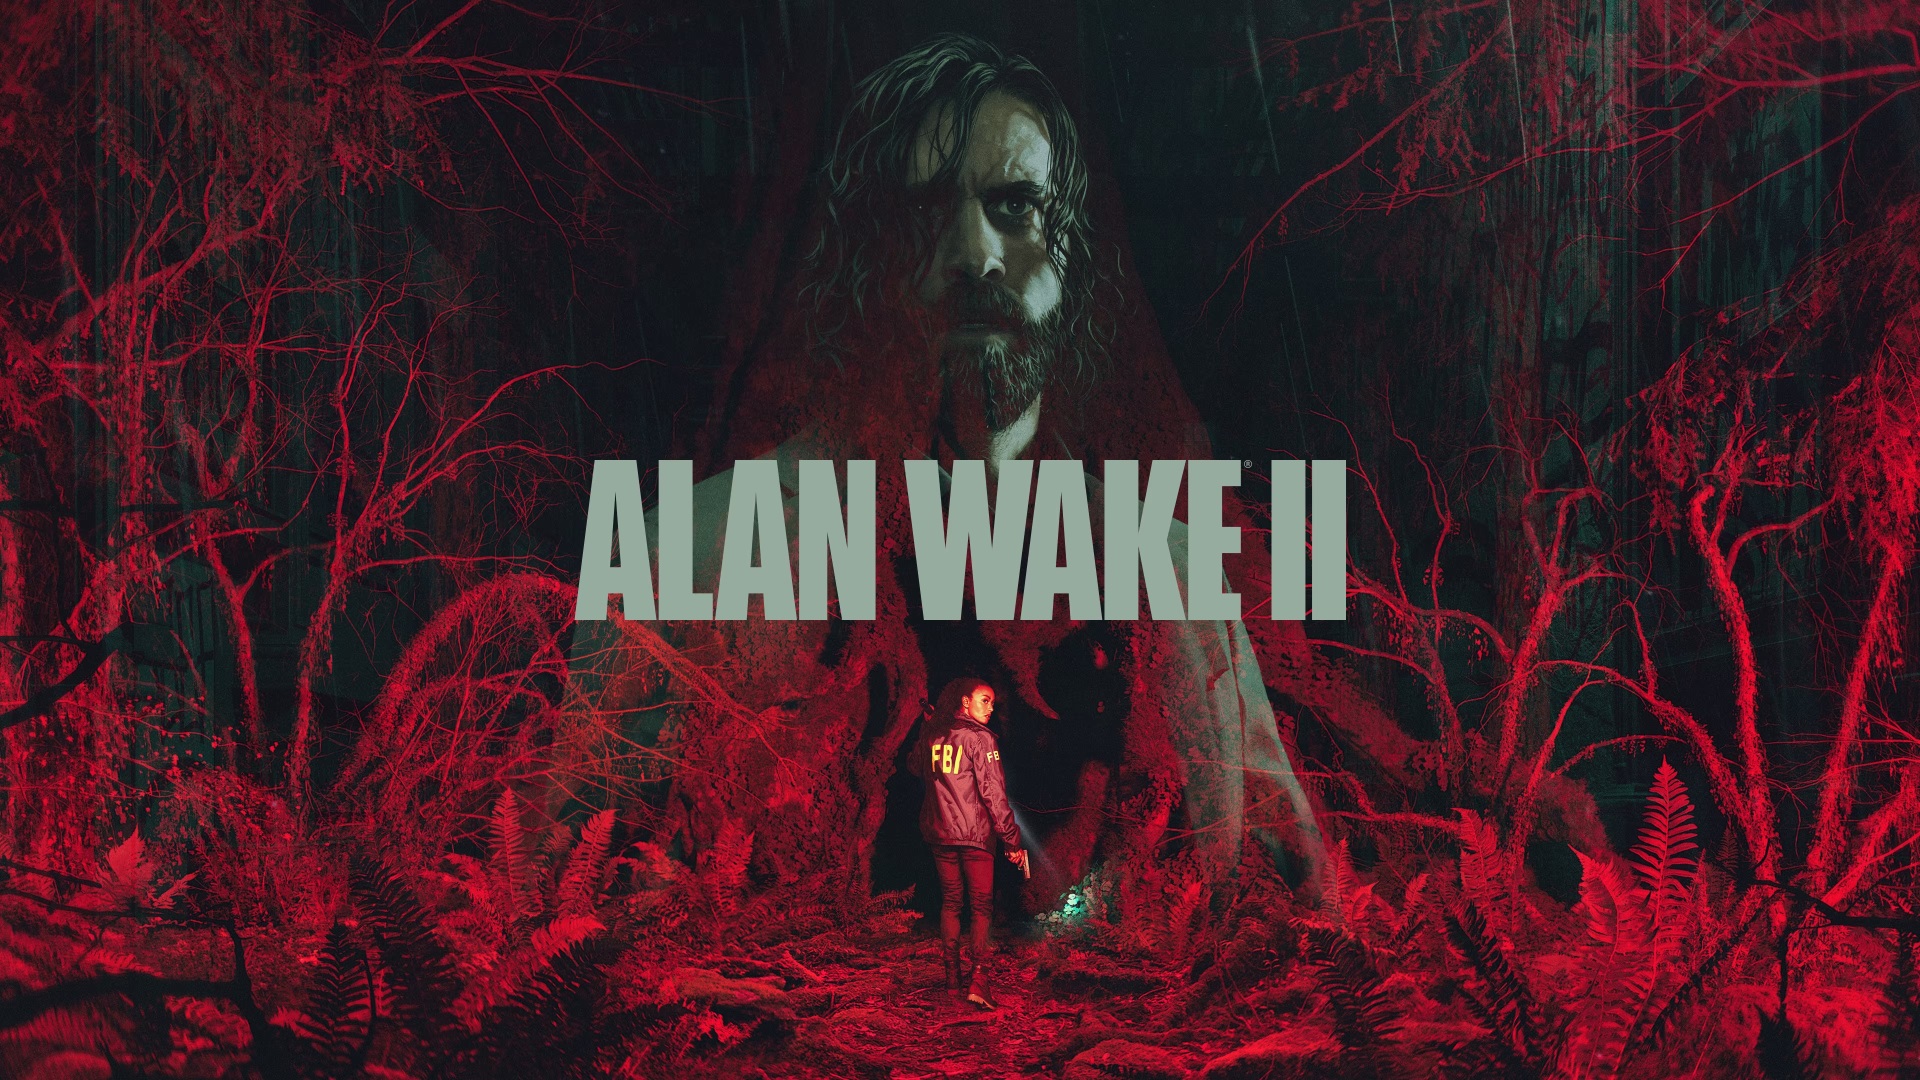 Radeon releases dedicated AMD Software update for Alan Wake 2